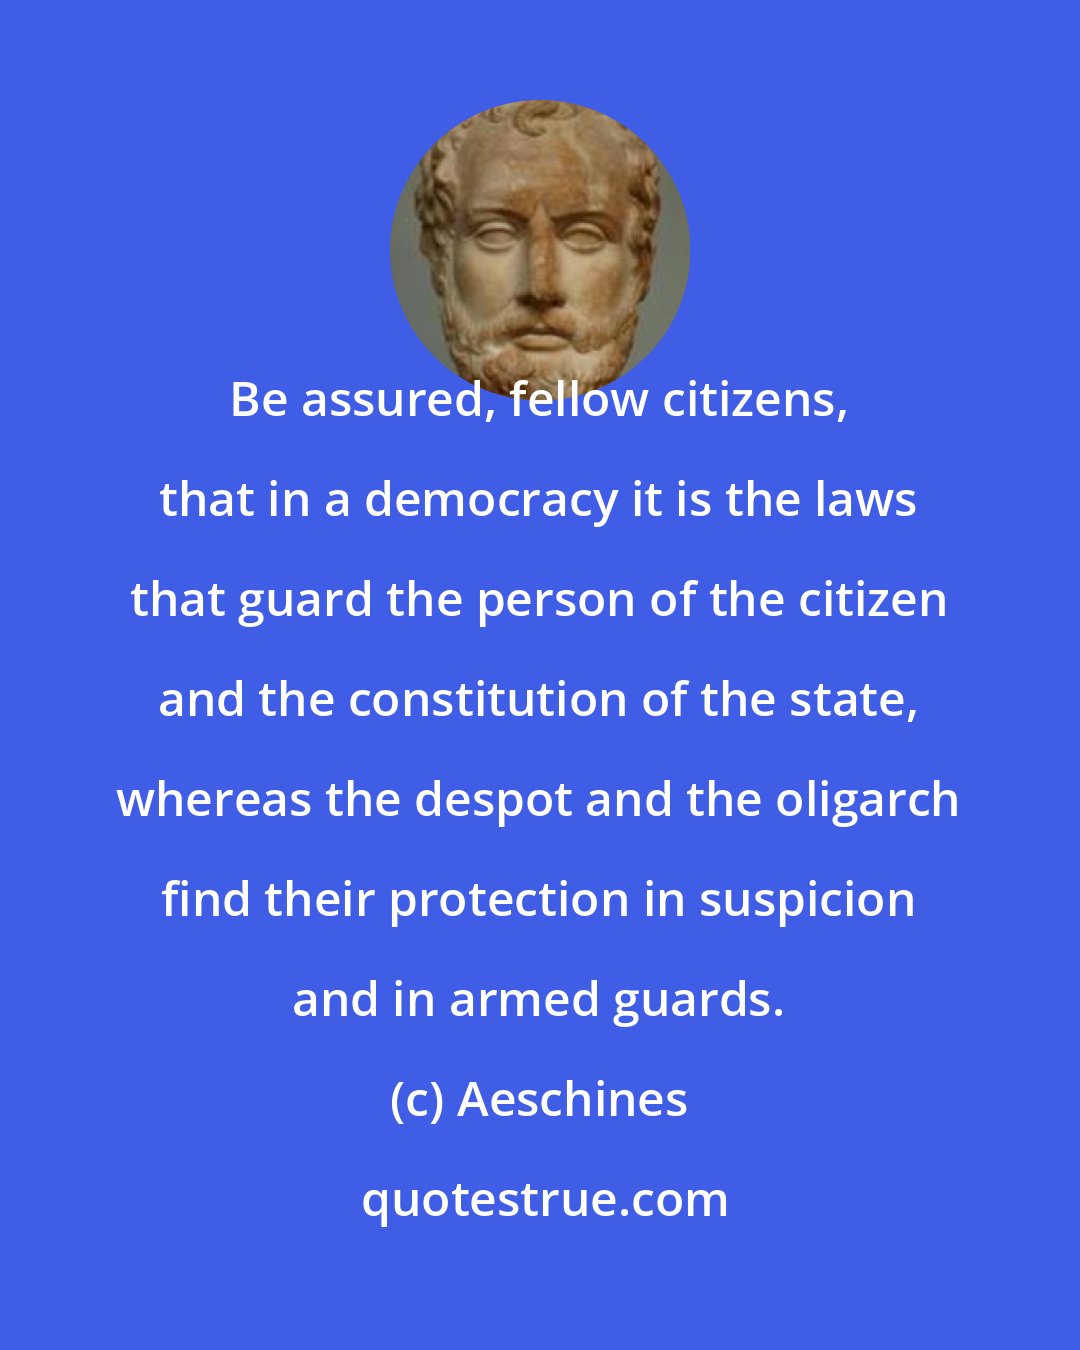 Aeschines: Be assured, fellow citizens, that in a democracy it is the laws that guard the person of the citizen and the constitution of the state, whereas the despot and the oligarch find their protection in suspicion and in armed guards.